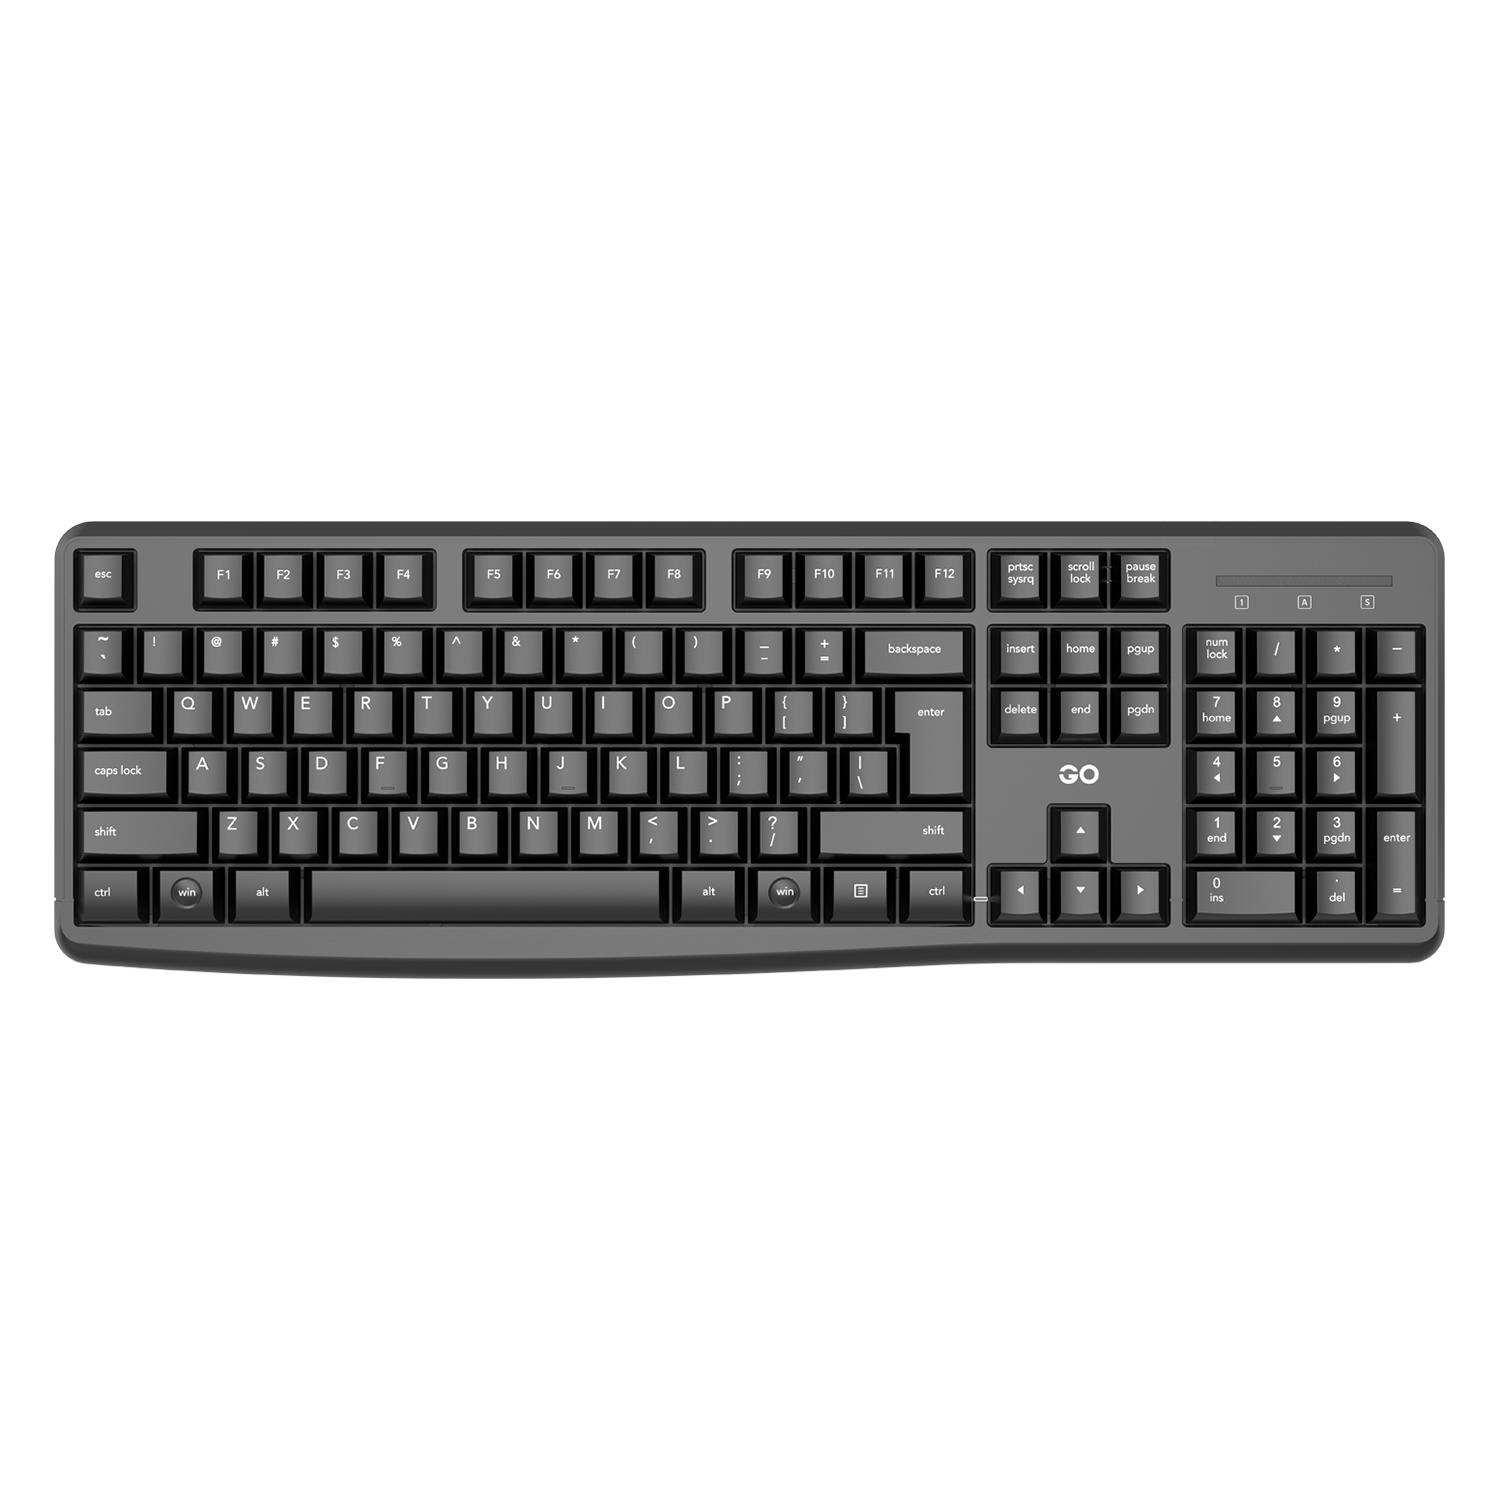 Fantech Office PC Wireless Keyboard and Mouse Combo Computer Set (WK-894)